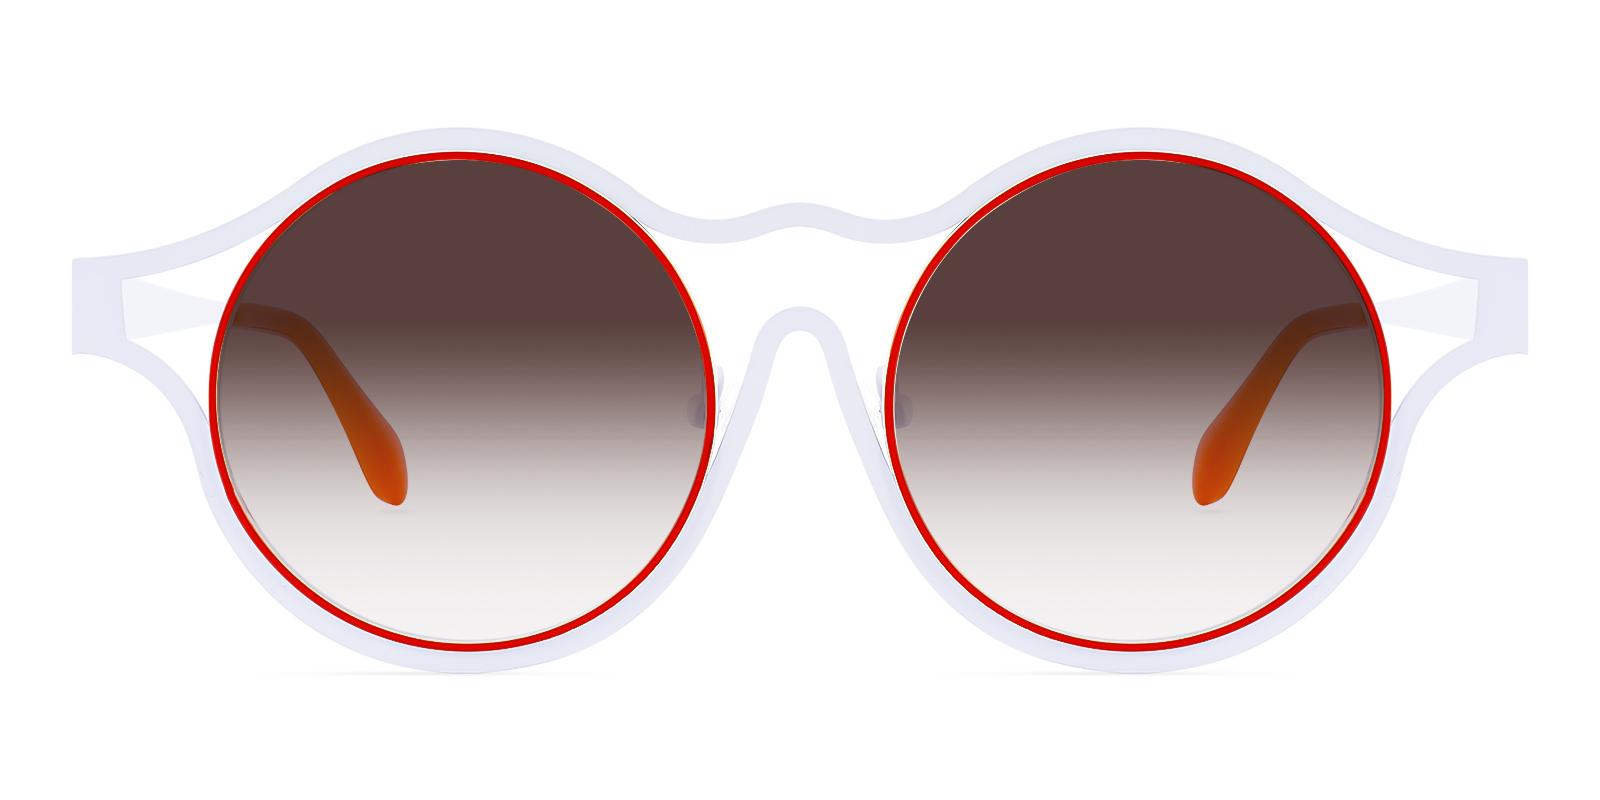 Bankcy Orange Metal Sunglasses , NosePads Frames from ABBE Glasses